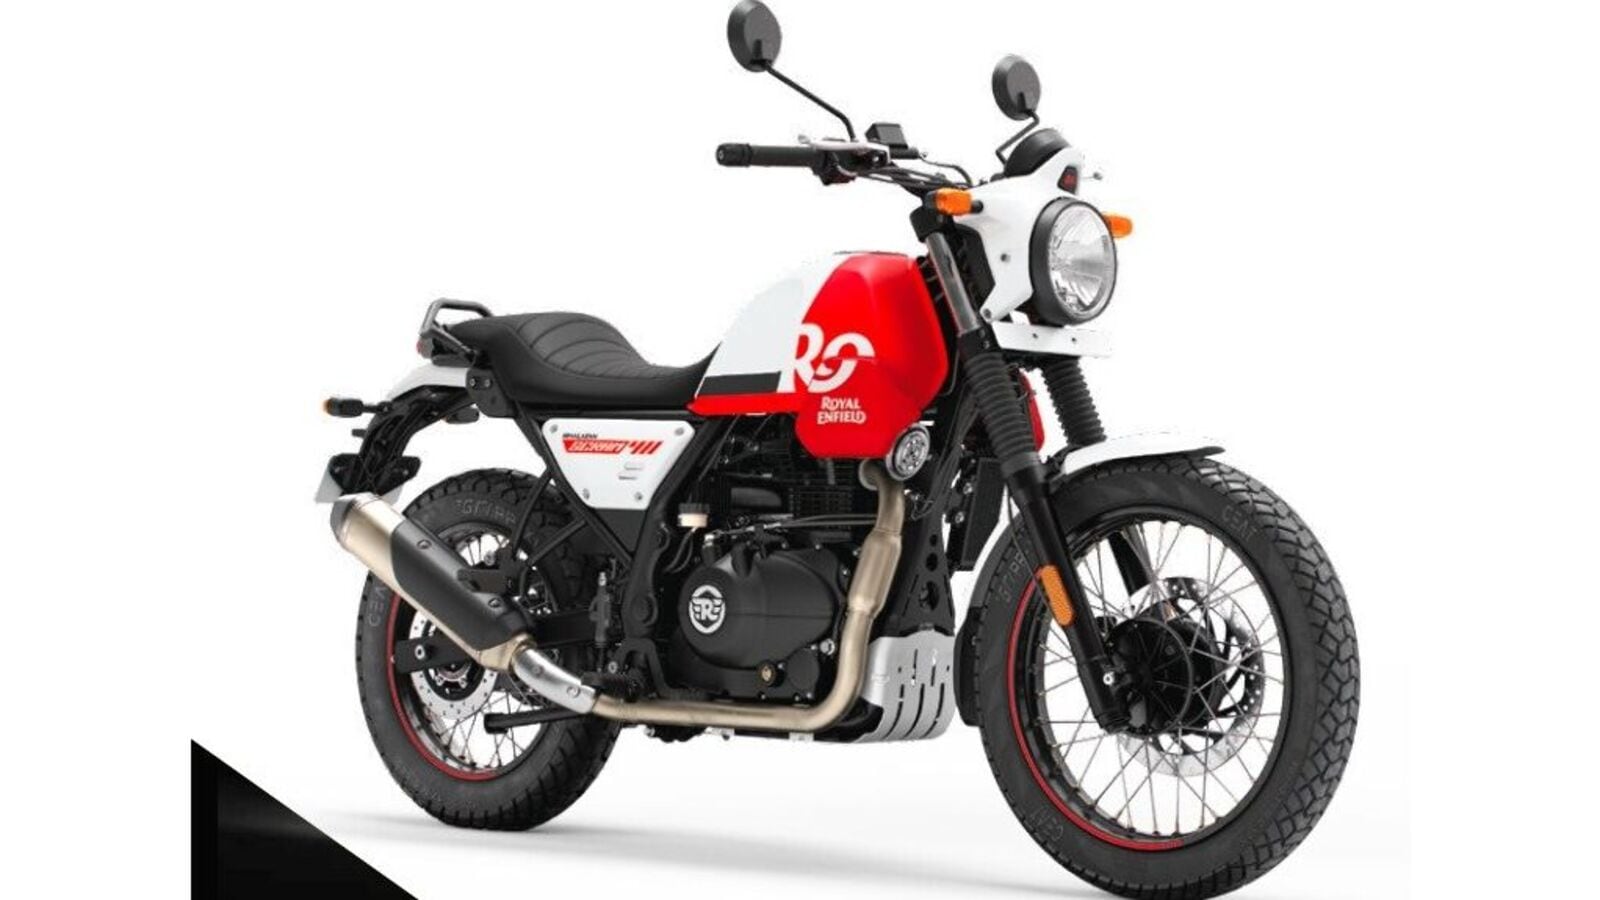 Royal Enfield Scram 411 Launched: Check Price in India, Photo, Design, Features, Variants, and more